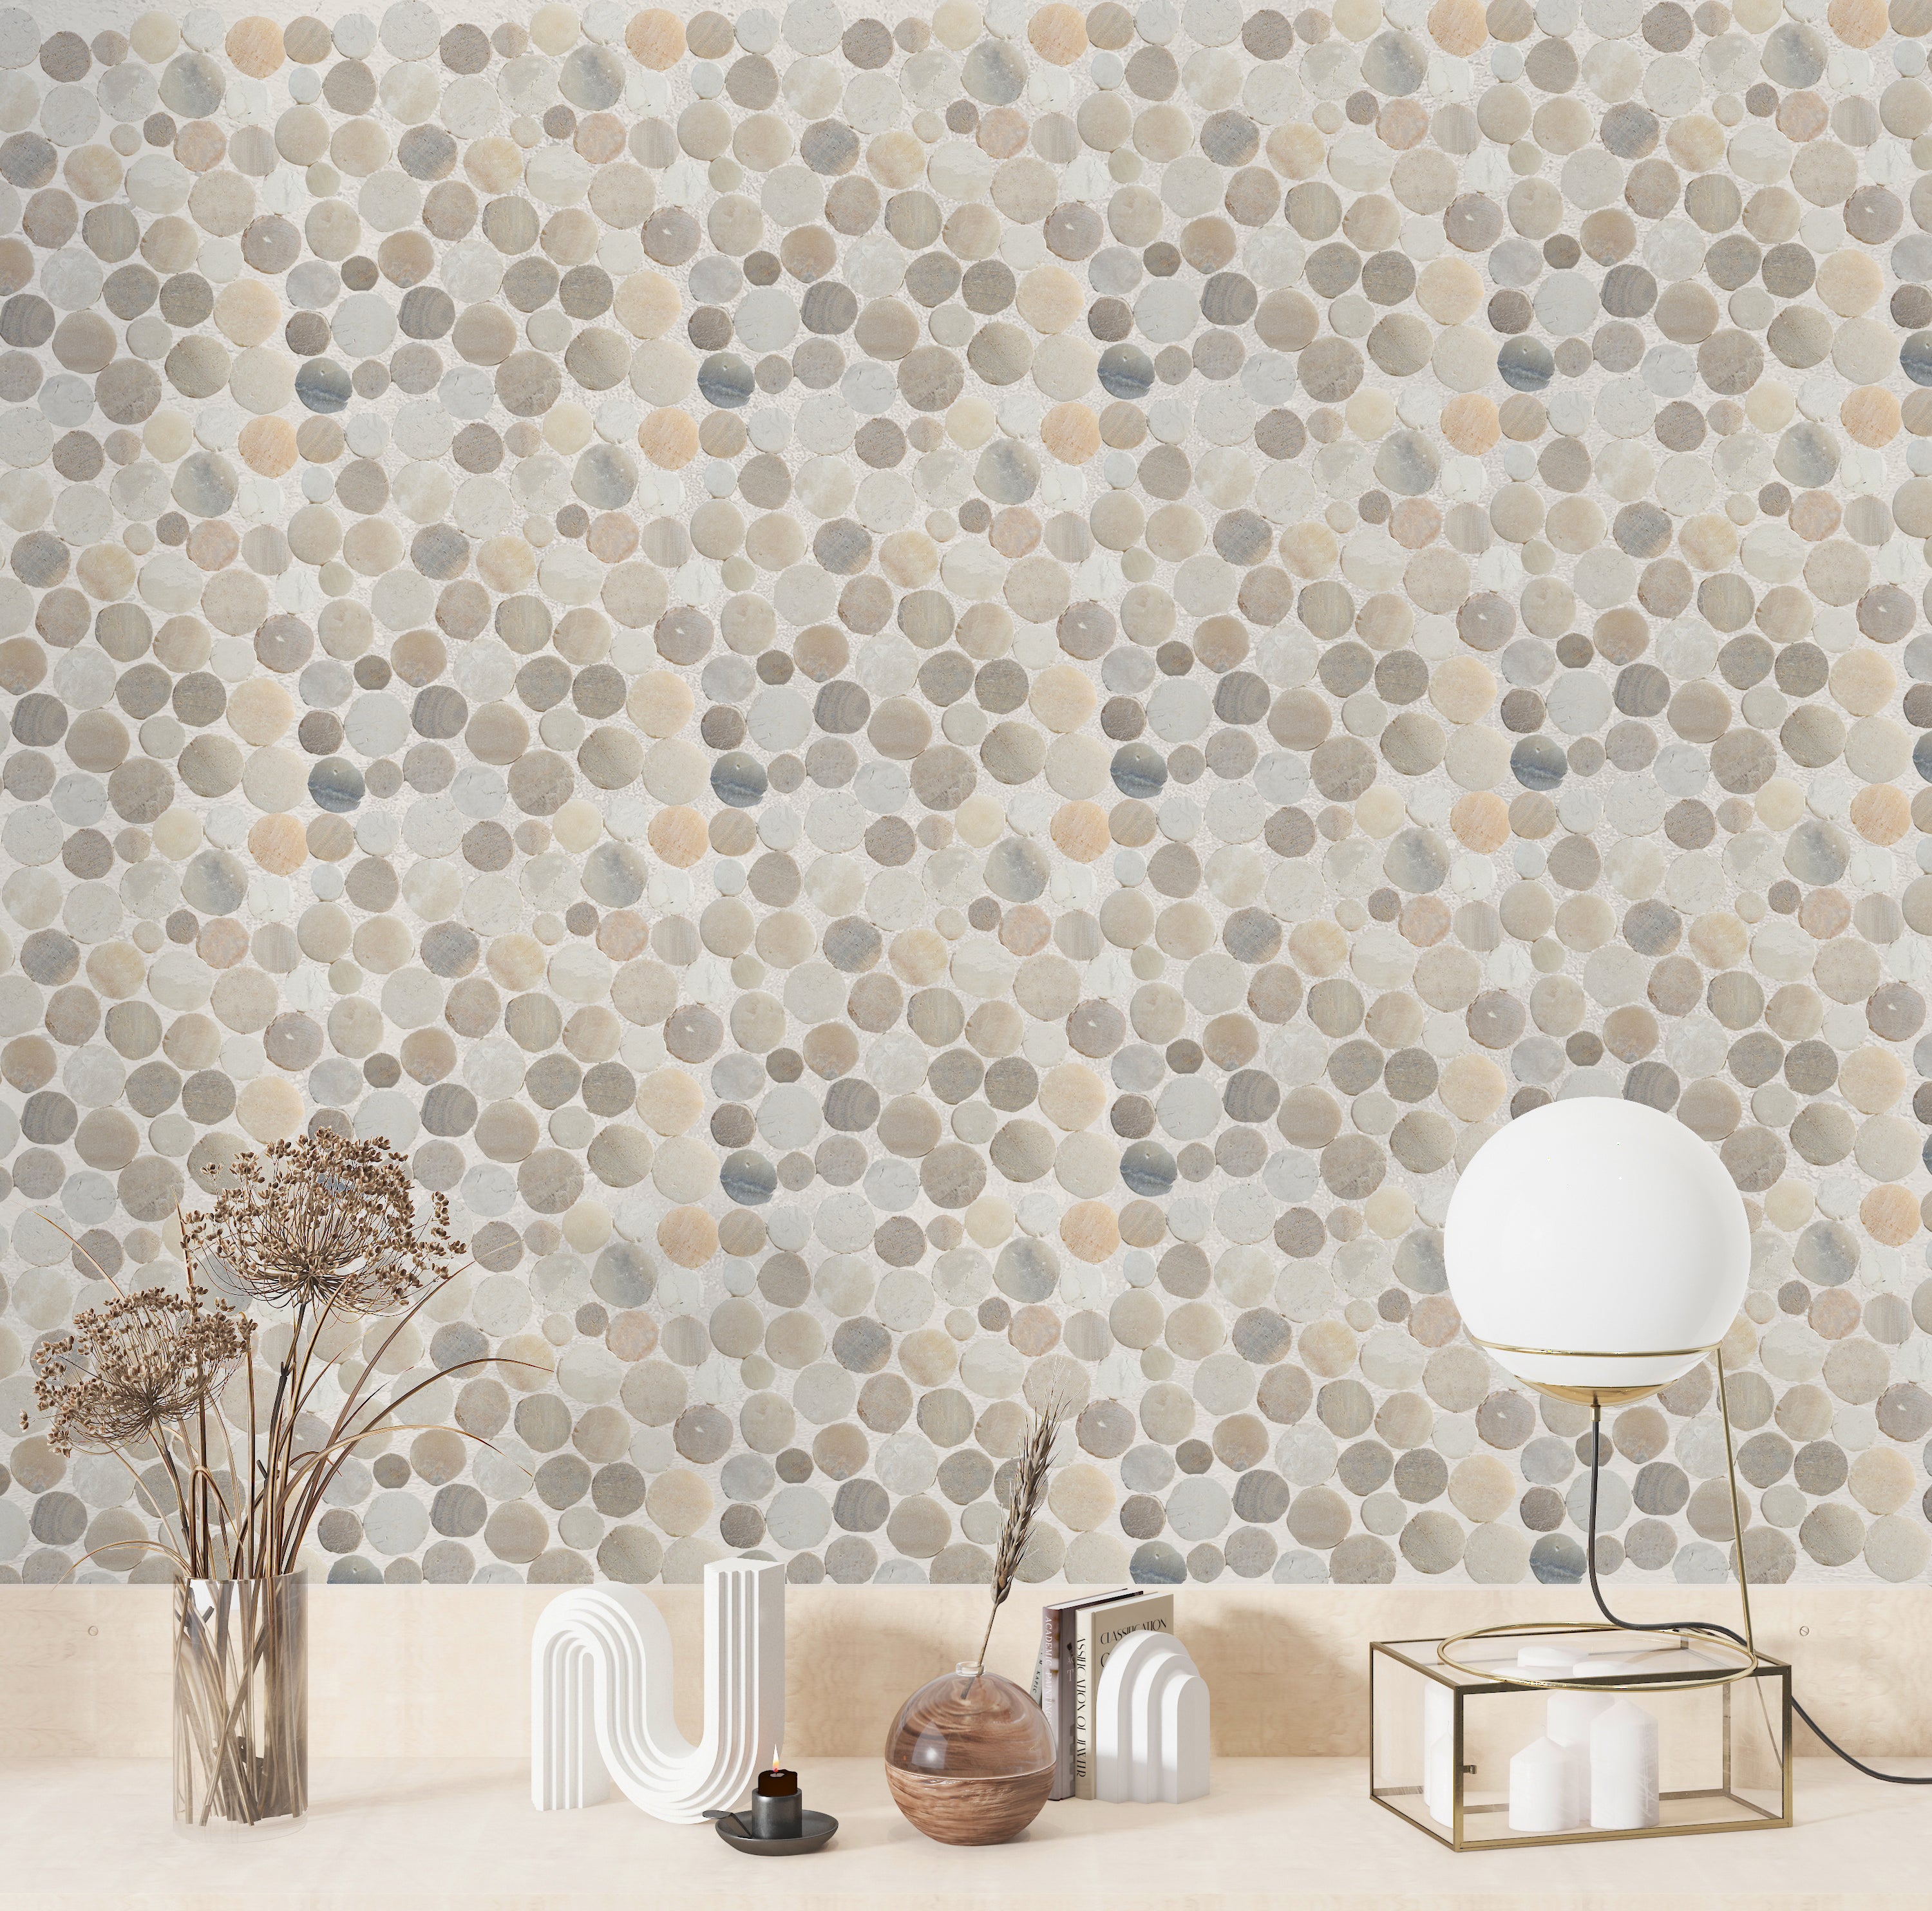 Sunset pebble tile wall with modern decor on counter in front of it